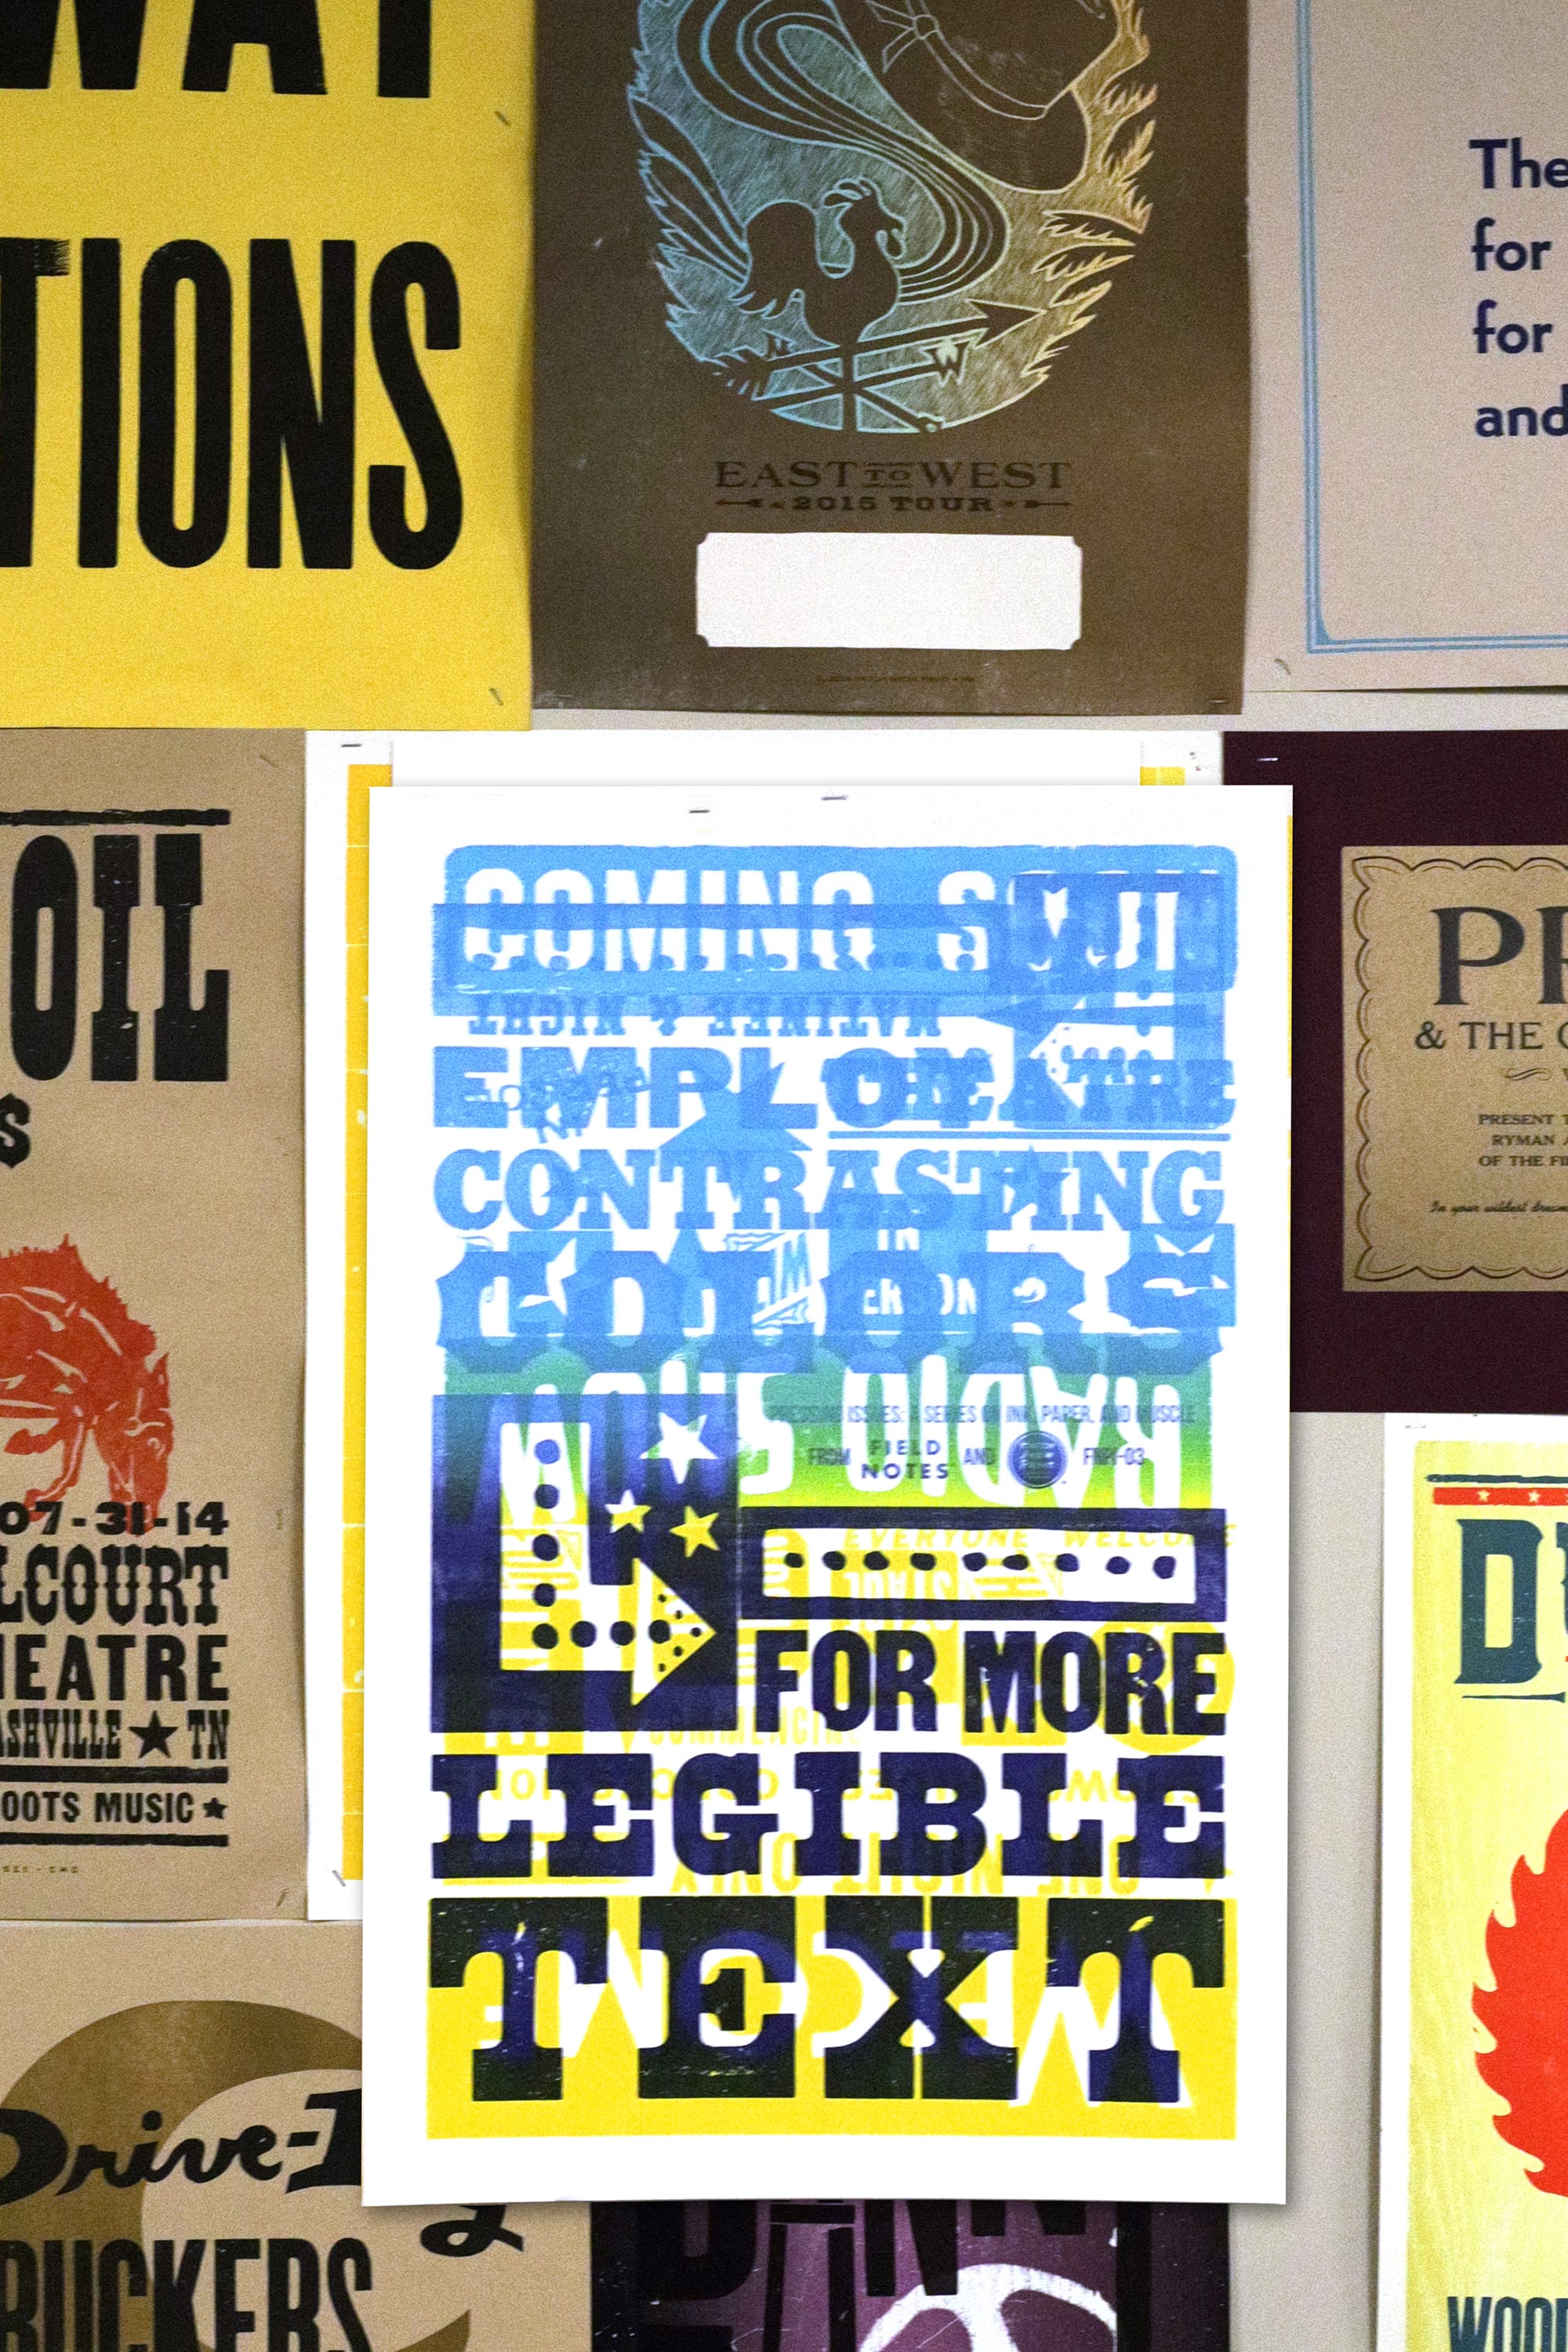 Field Notes: Hatch Show Print